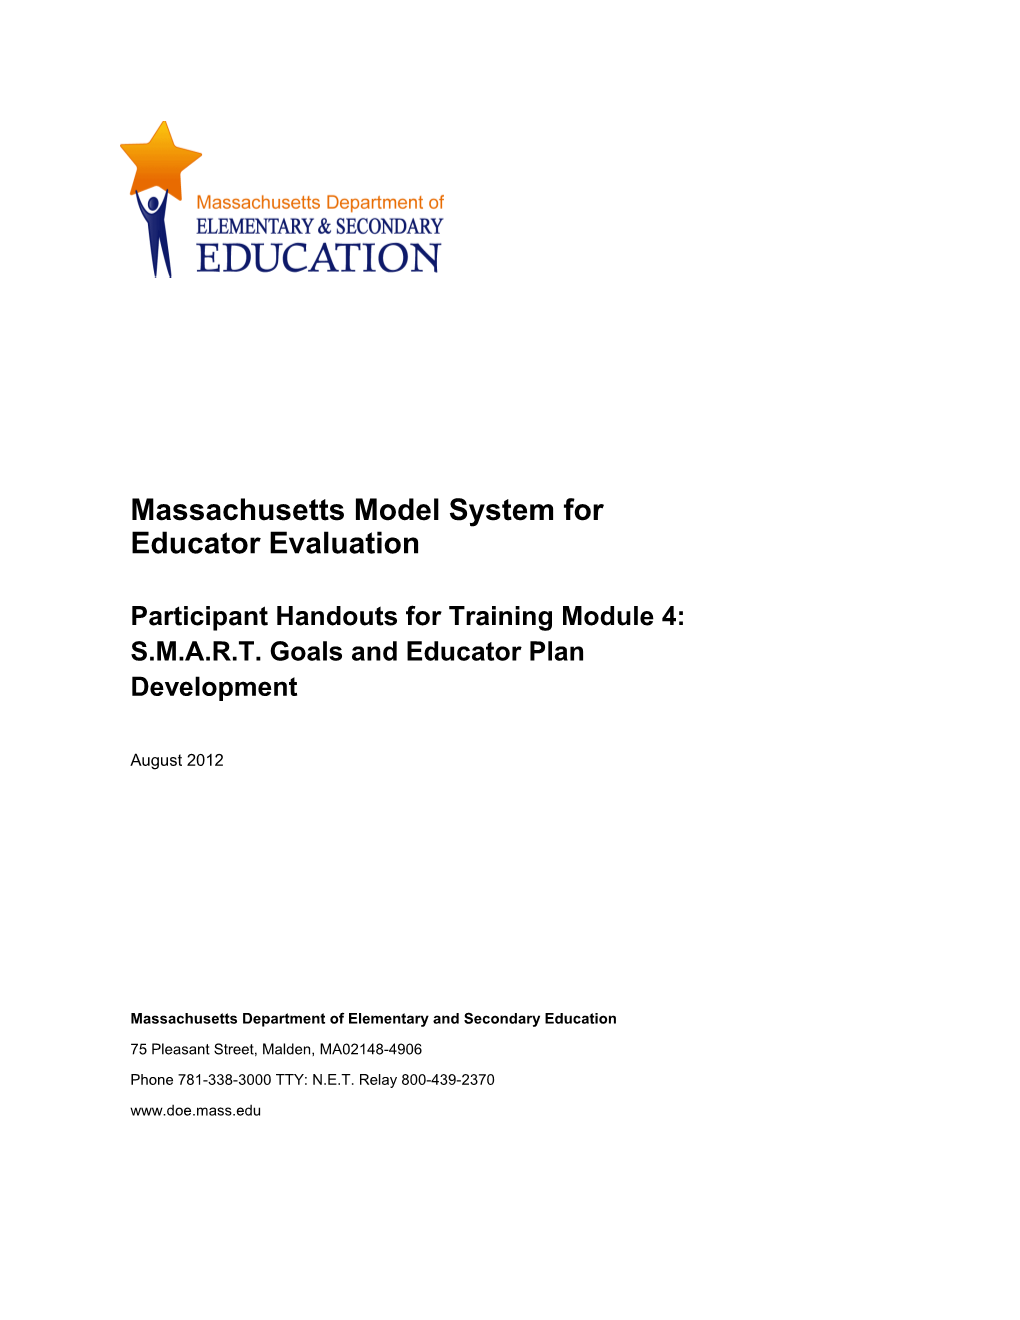 MA Model System Training Module 4 Handout Packet: S.M.A.R.T. Goals and Educator Plan Development